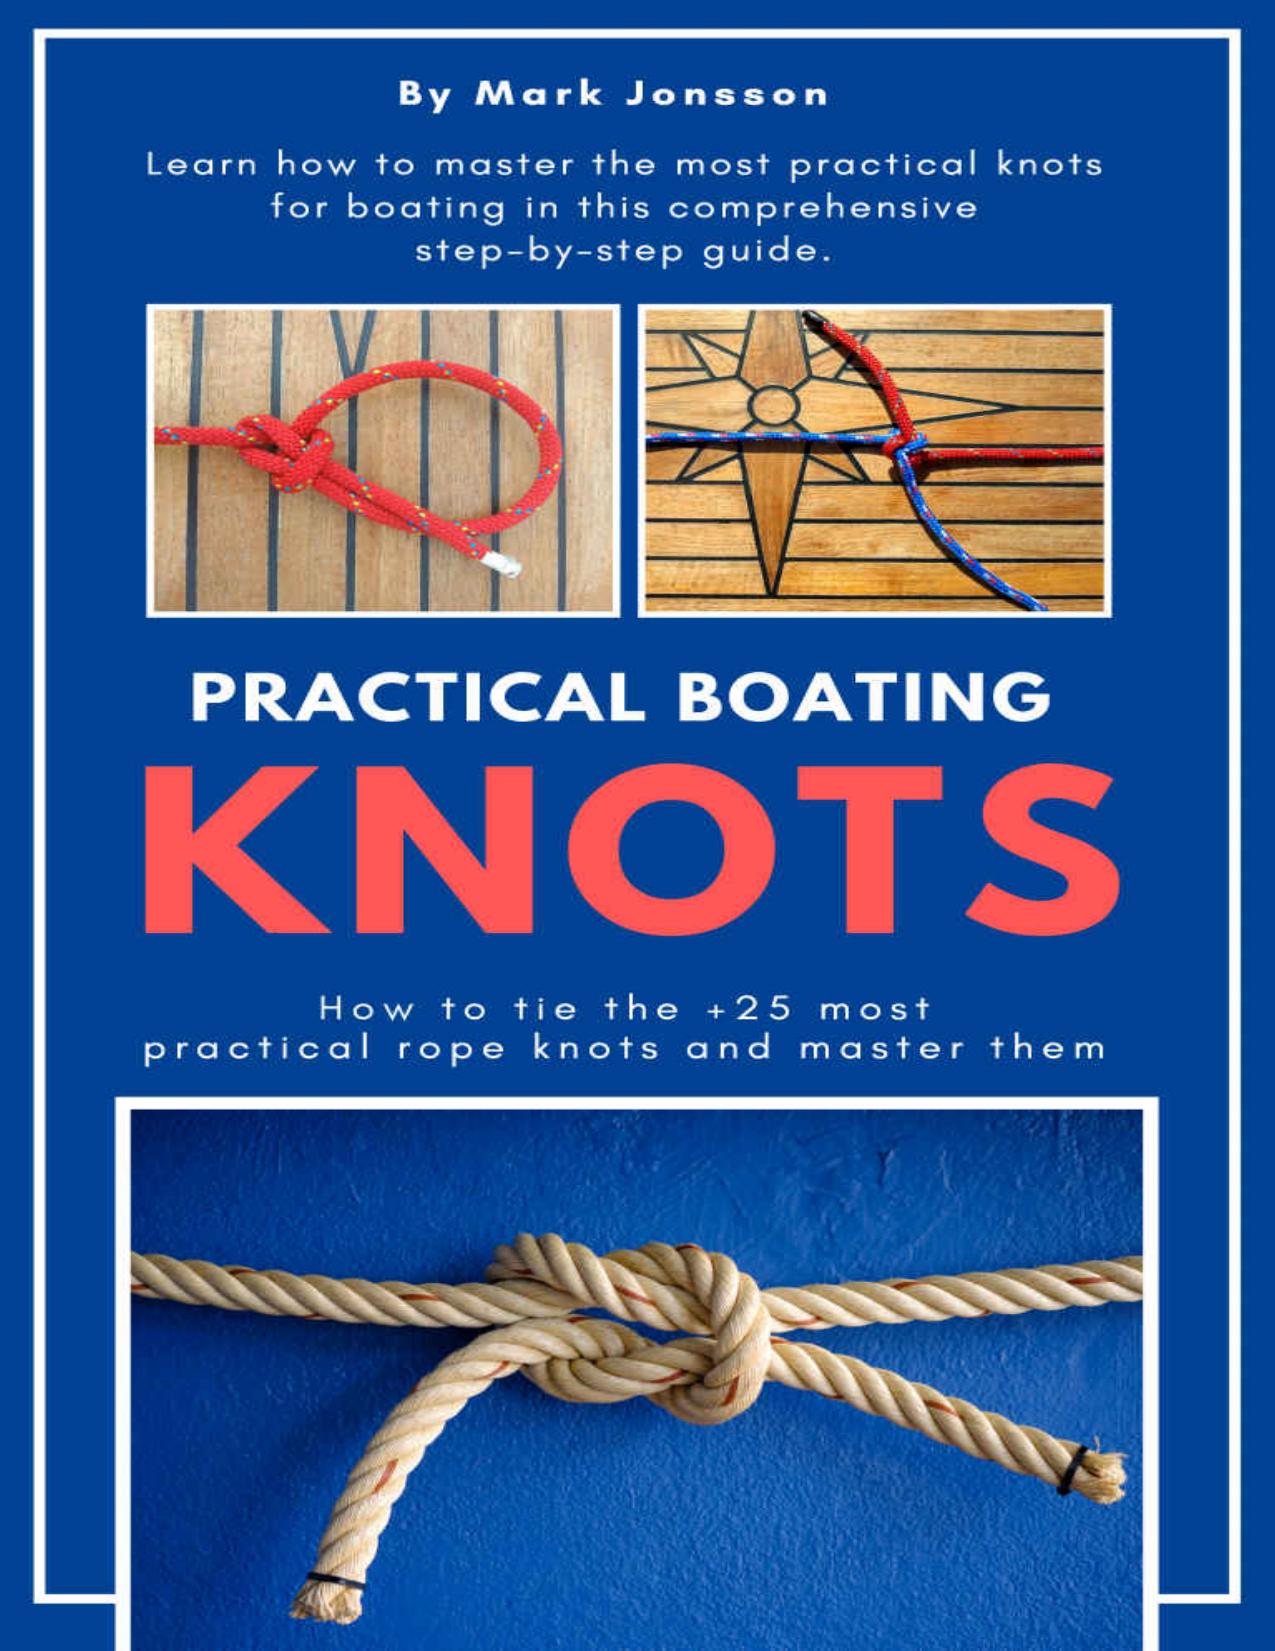 Practical Boating Knots: How to tie the +25 most practical rope knots and master them by Jonsson Mark